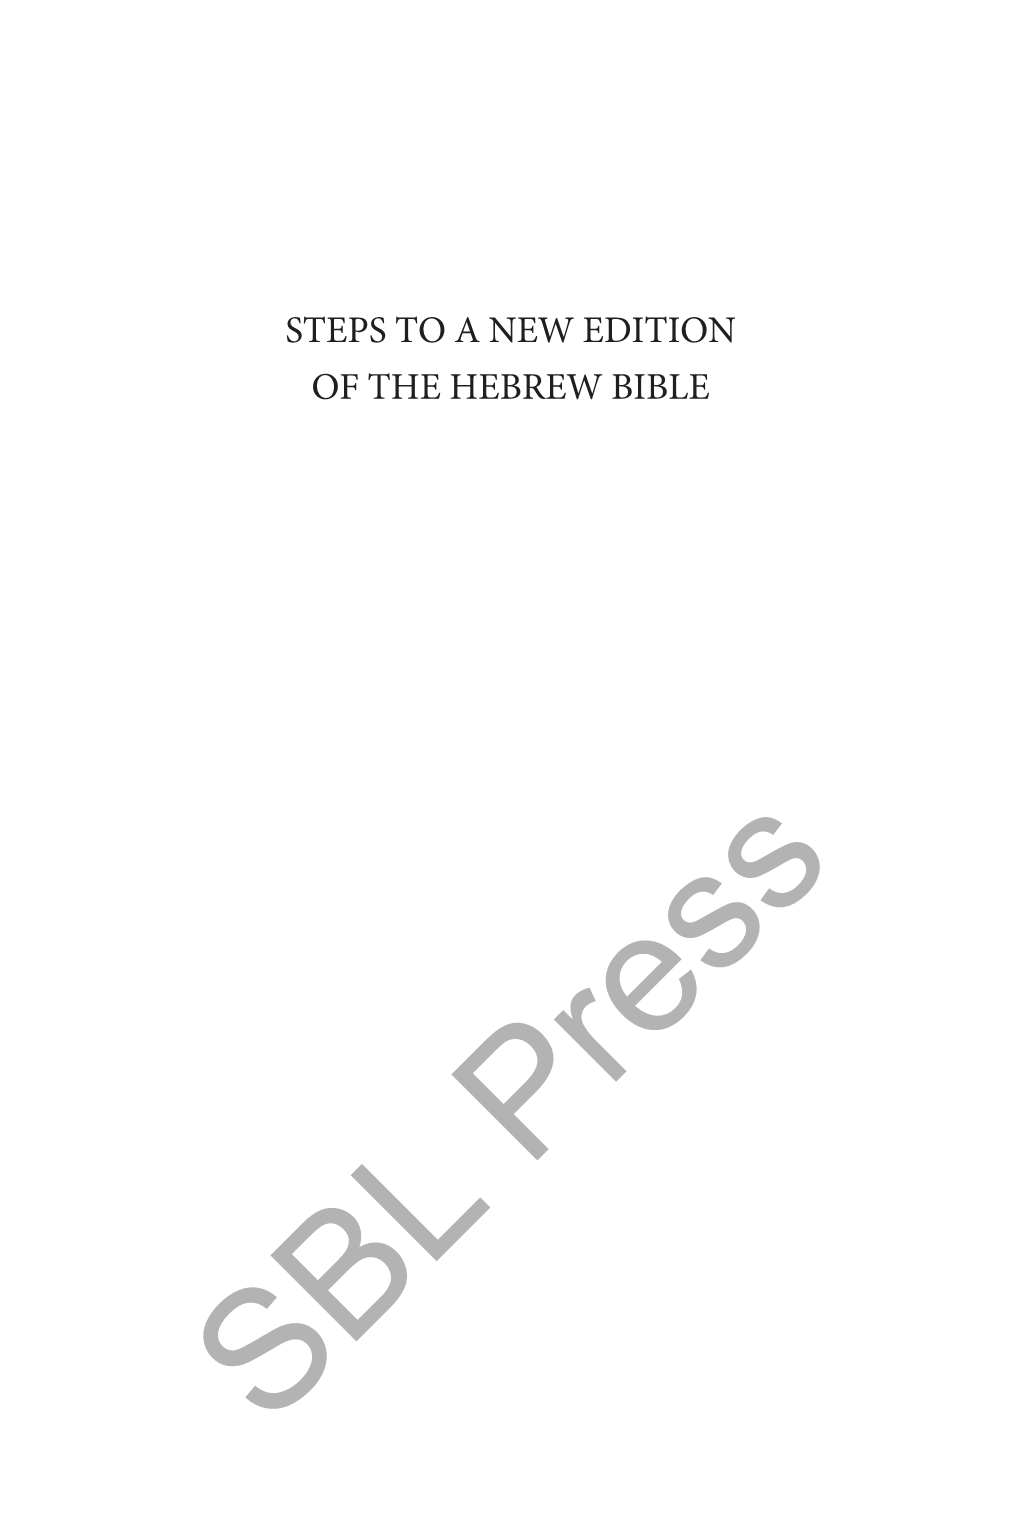 Steps to a New Edition of the Hebrew Bible / by Ronald Hendel